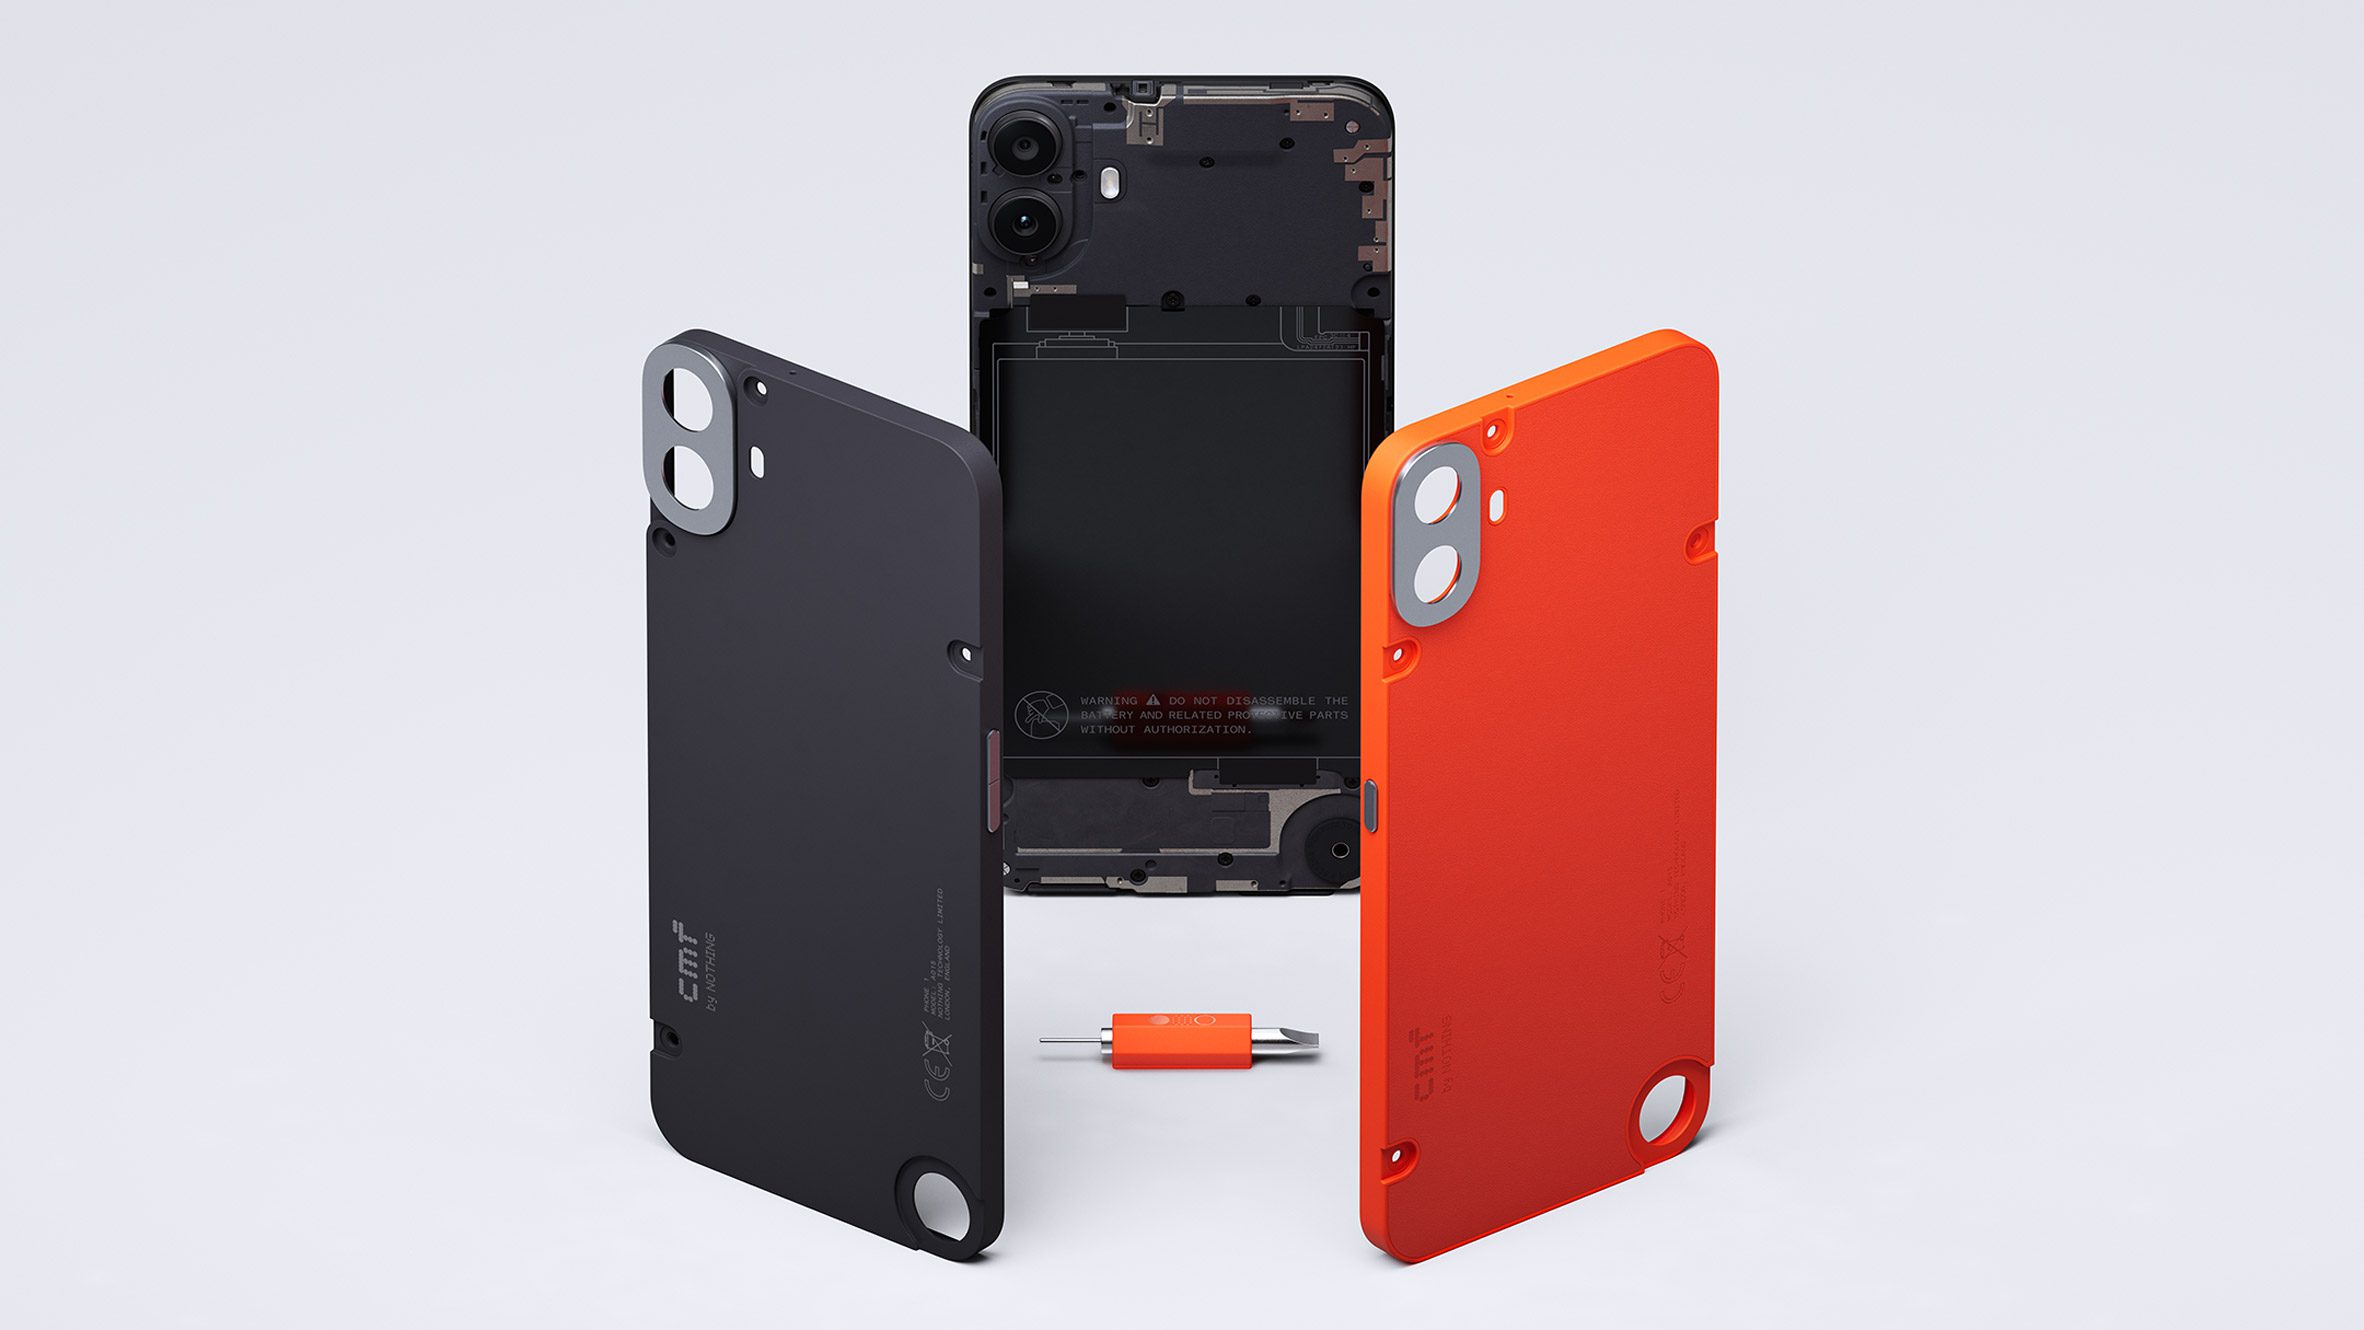 Image of the CMF Phone 1 smartphone with the back cover screwed off to reveal the internals and two case cover options in black and orange sitting in front of it